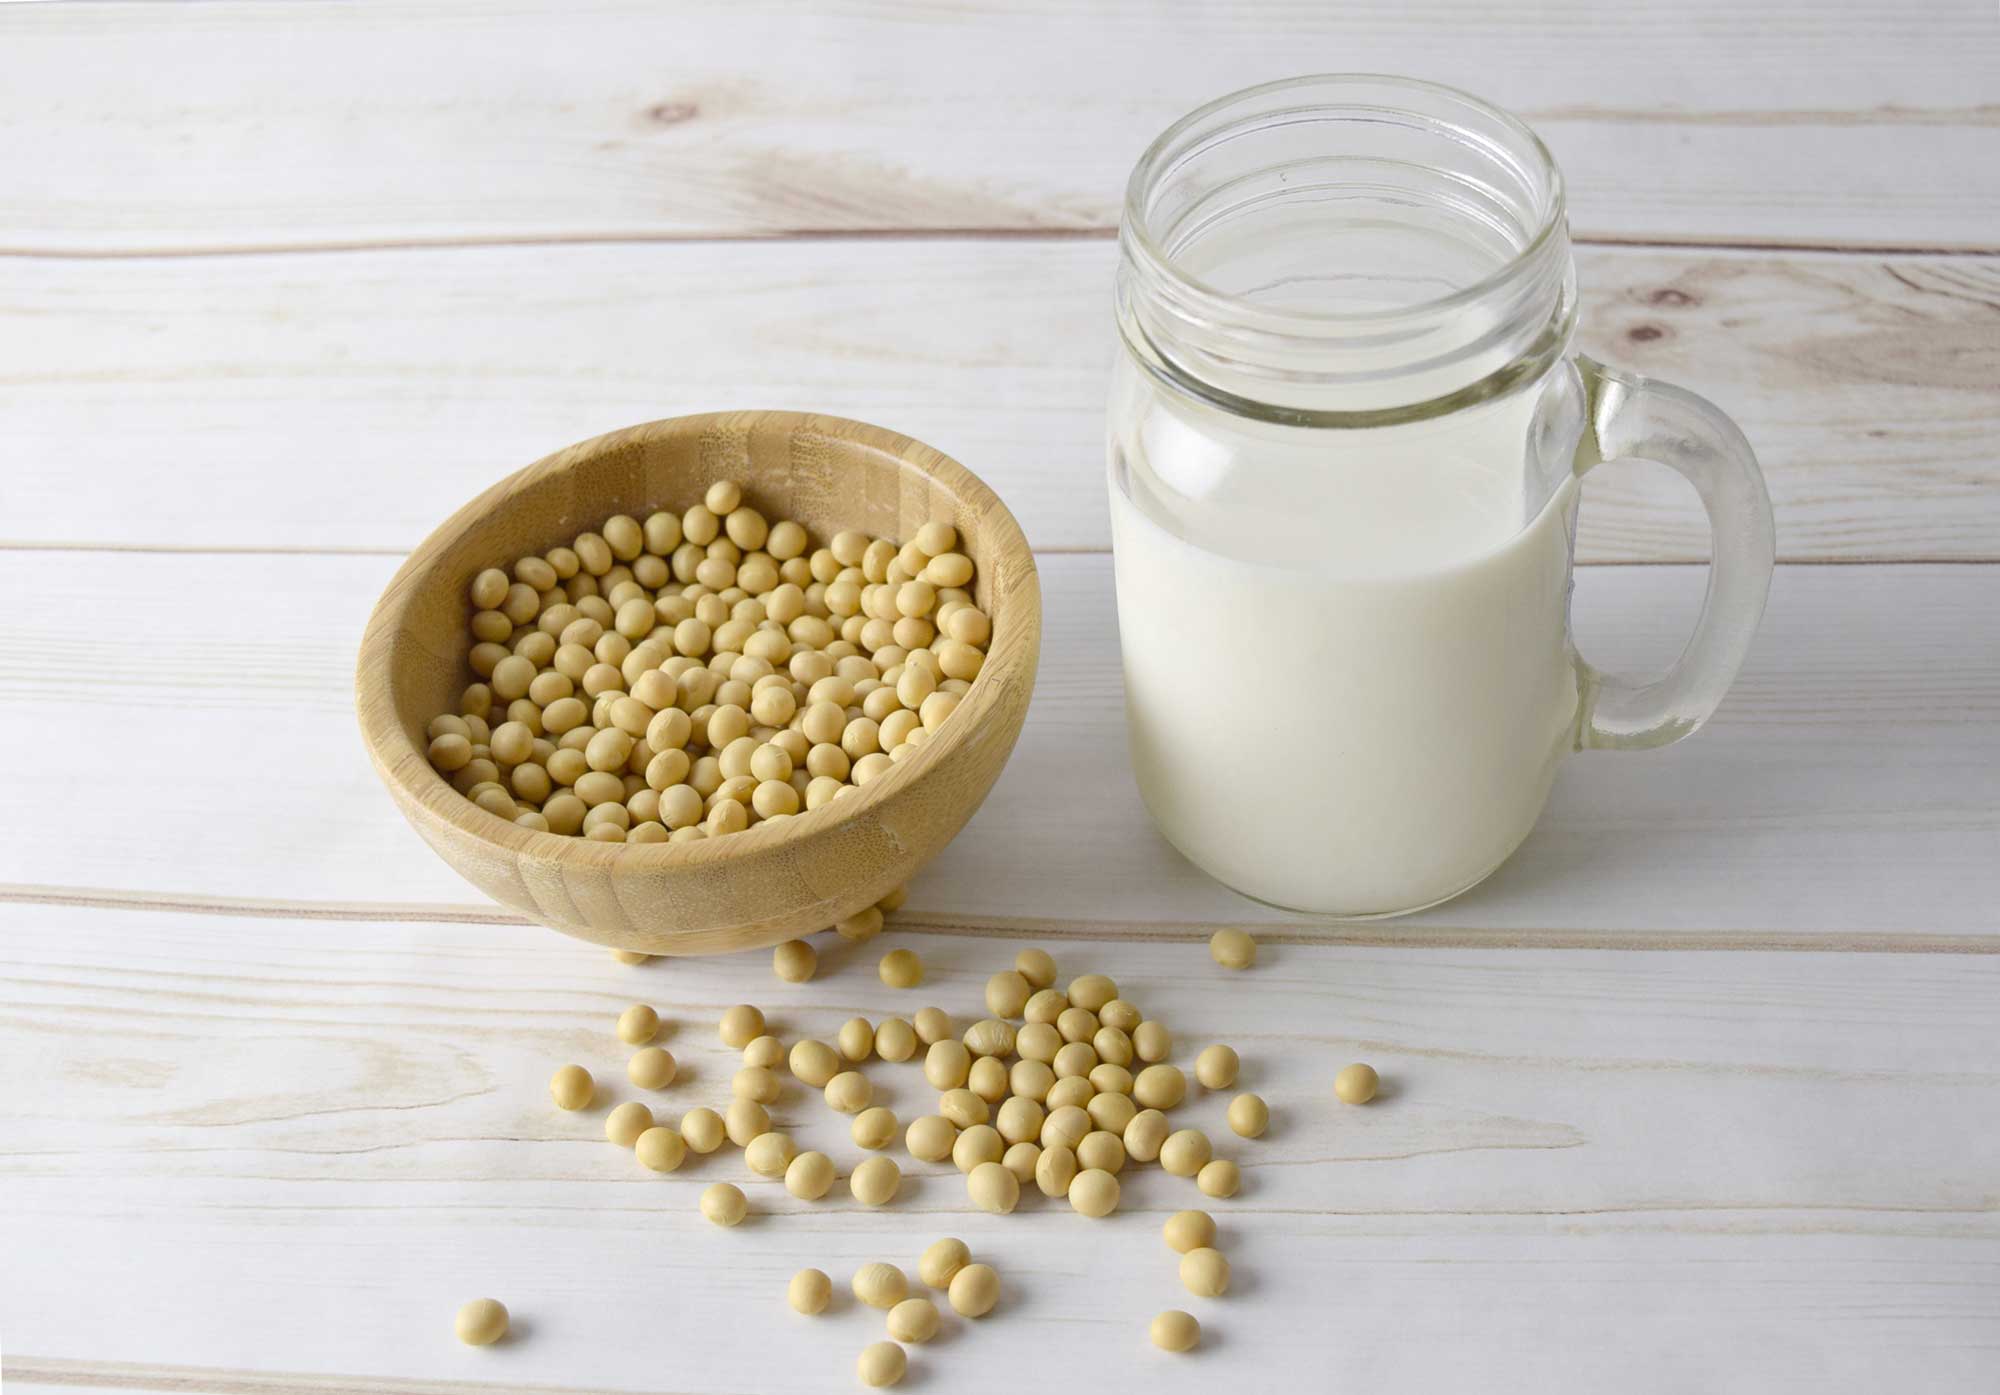 A bowl of soybeans next to a glass of milk.